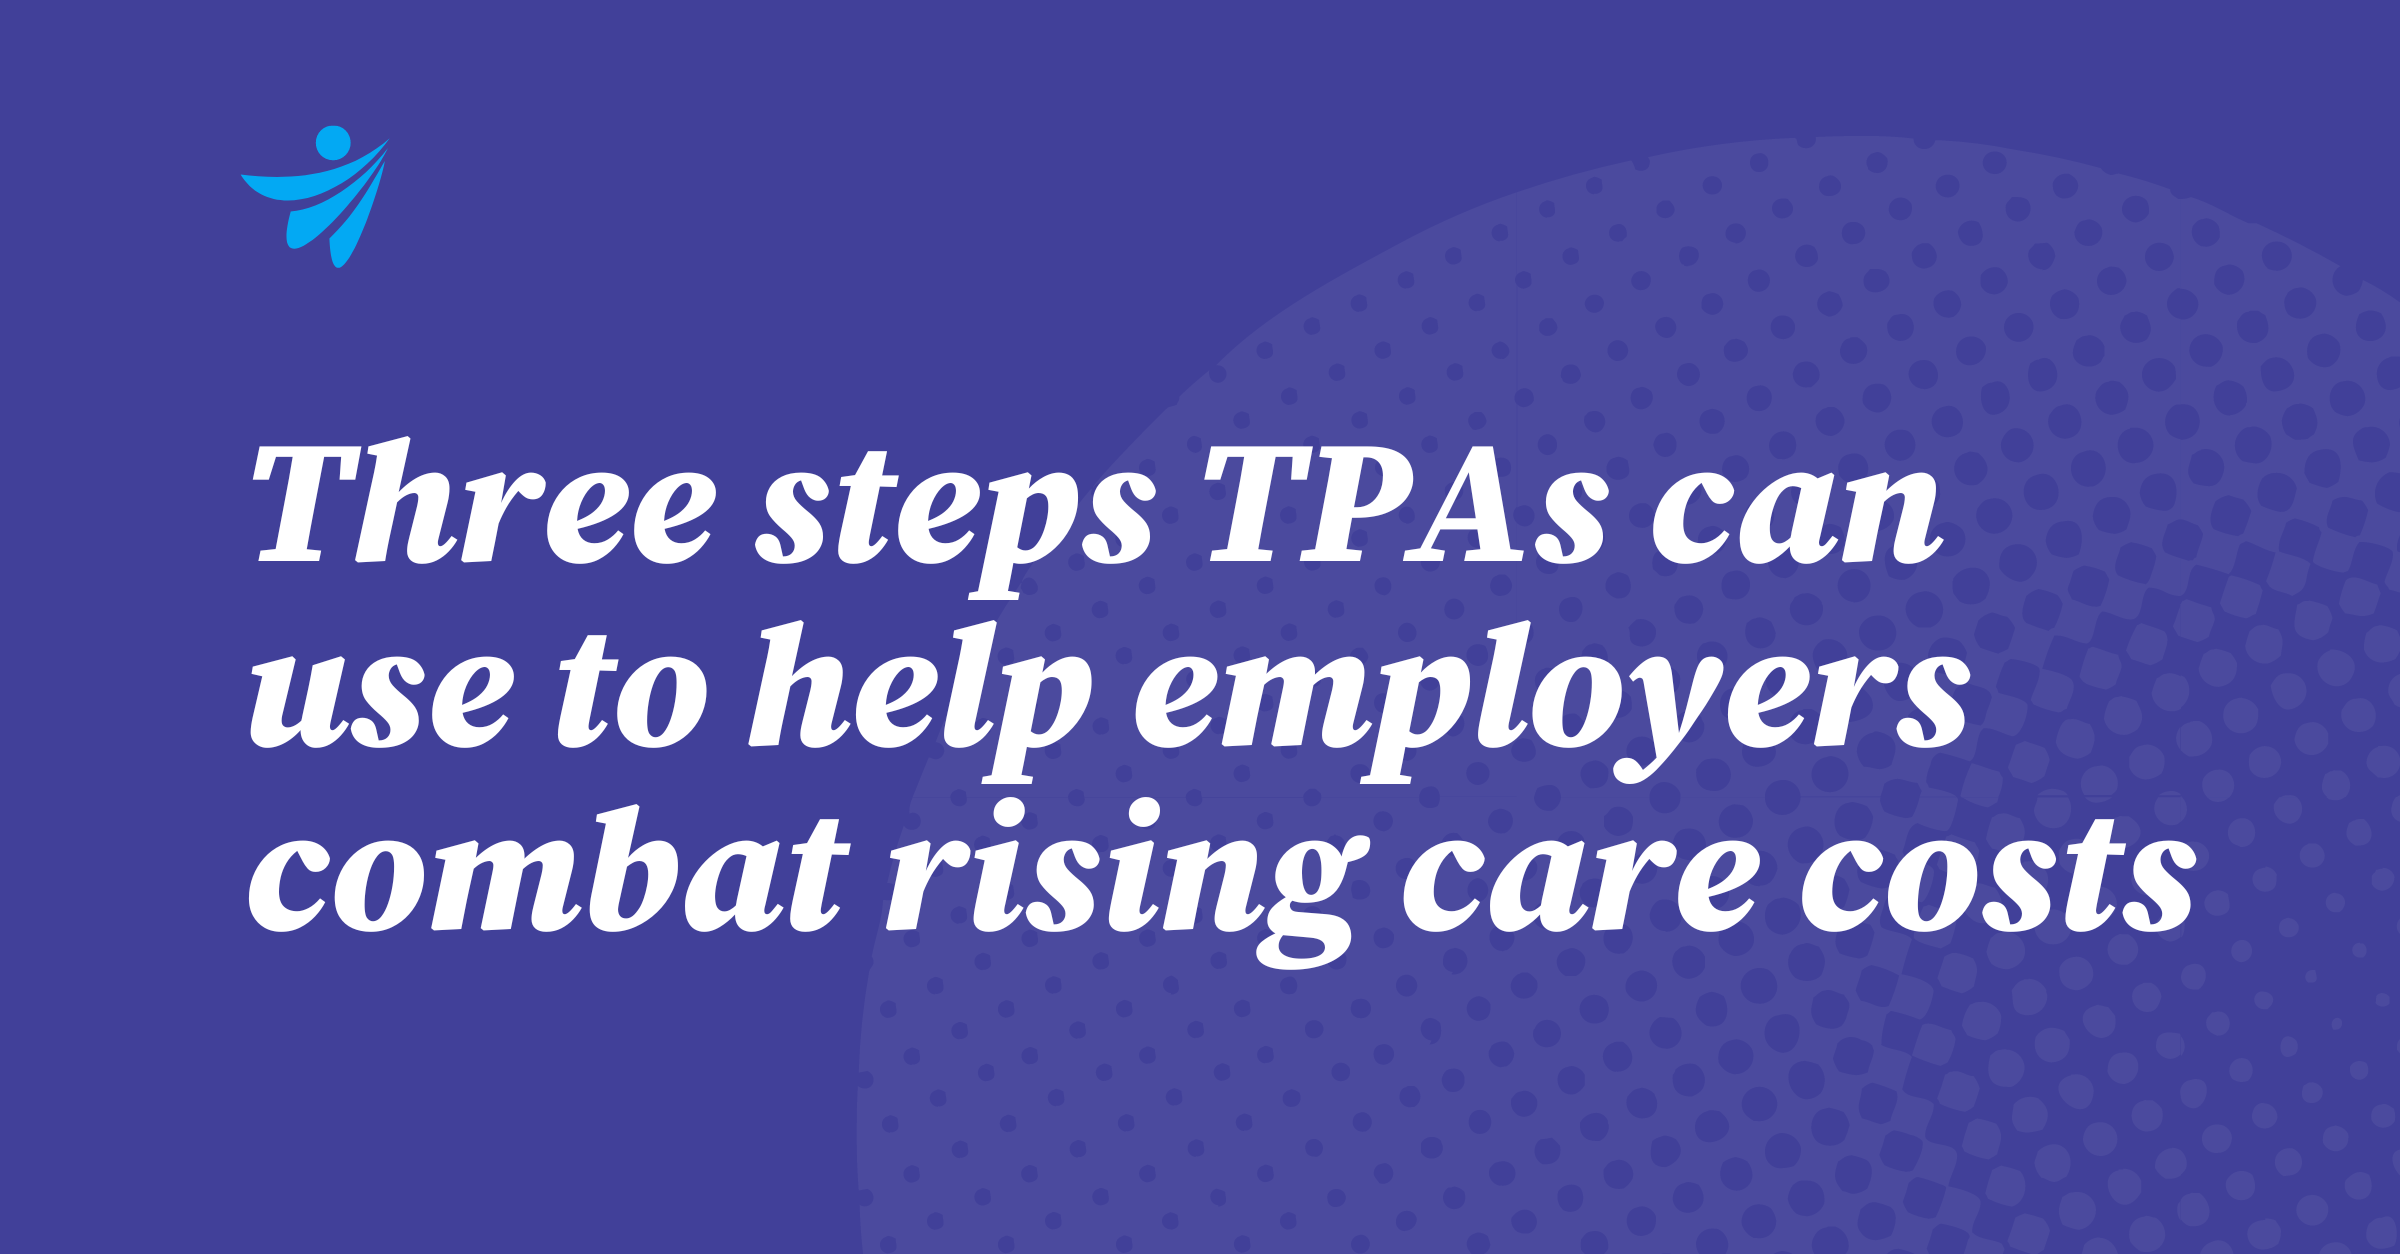 Thumbnail for Three steps third-party administrators can use to help employers combat rising care costs